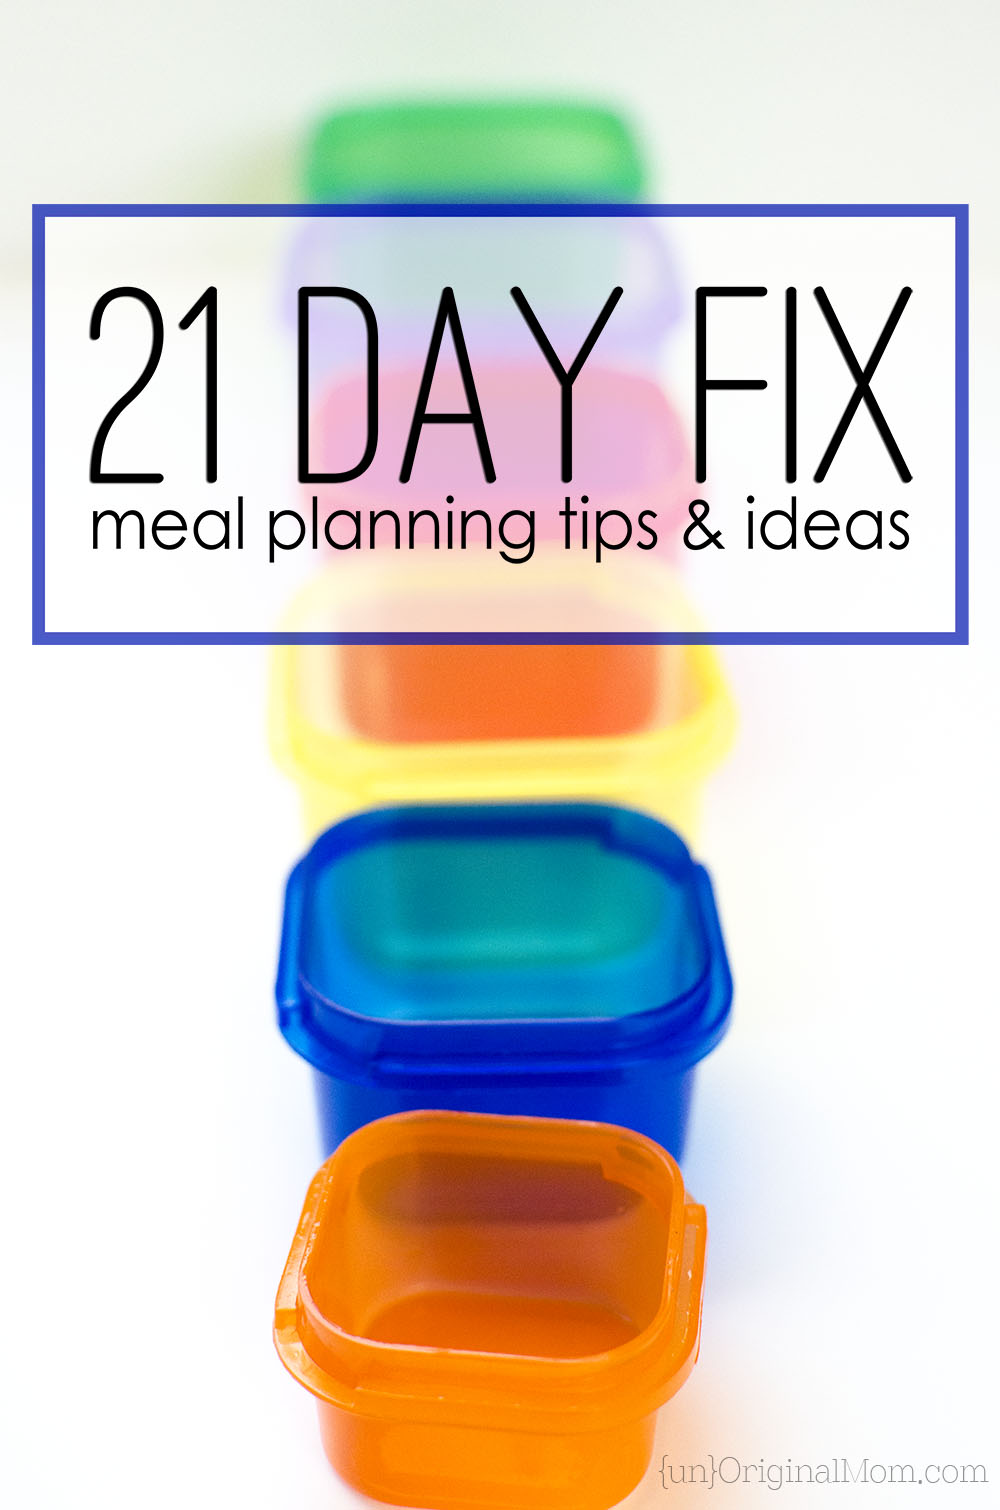 21 Day Fix meal planning ideas and tips from a non-beachbody coach